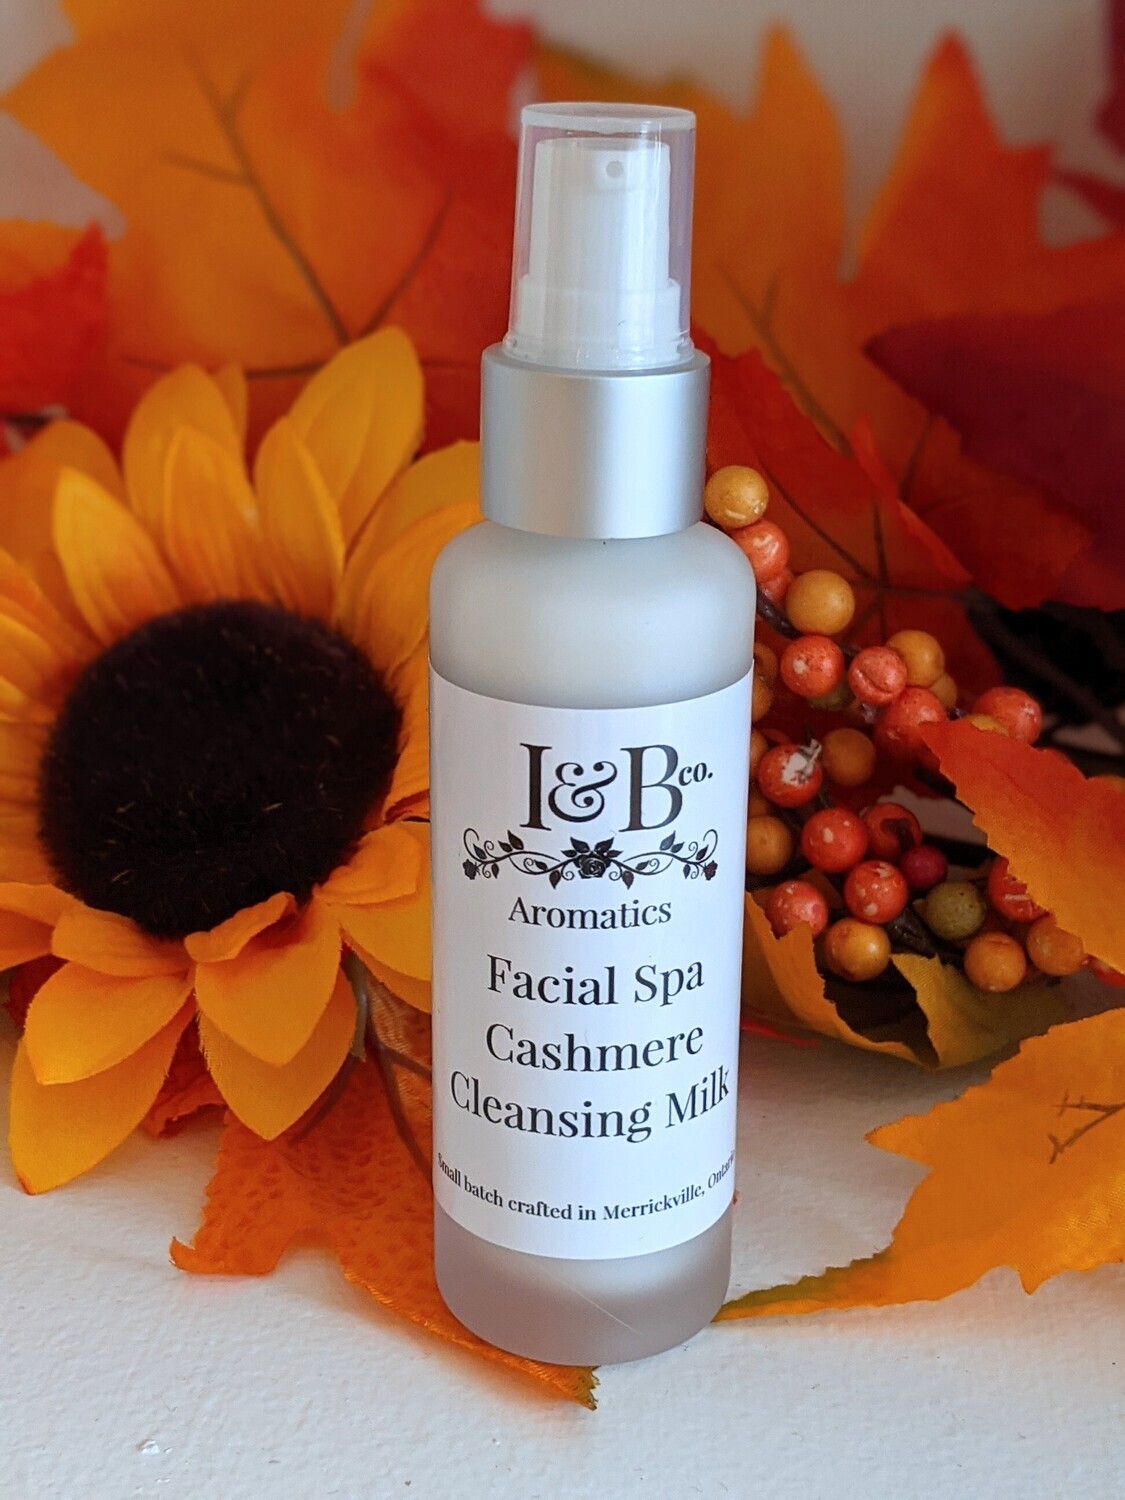 Facial Spa Cashmere Cleansing Milk